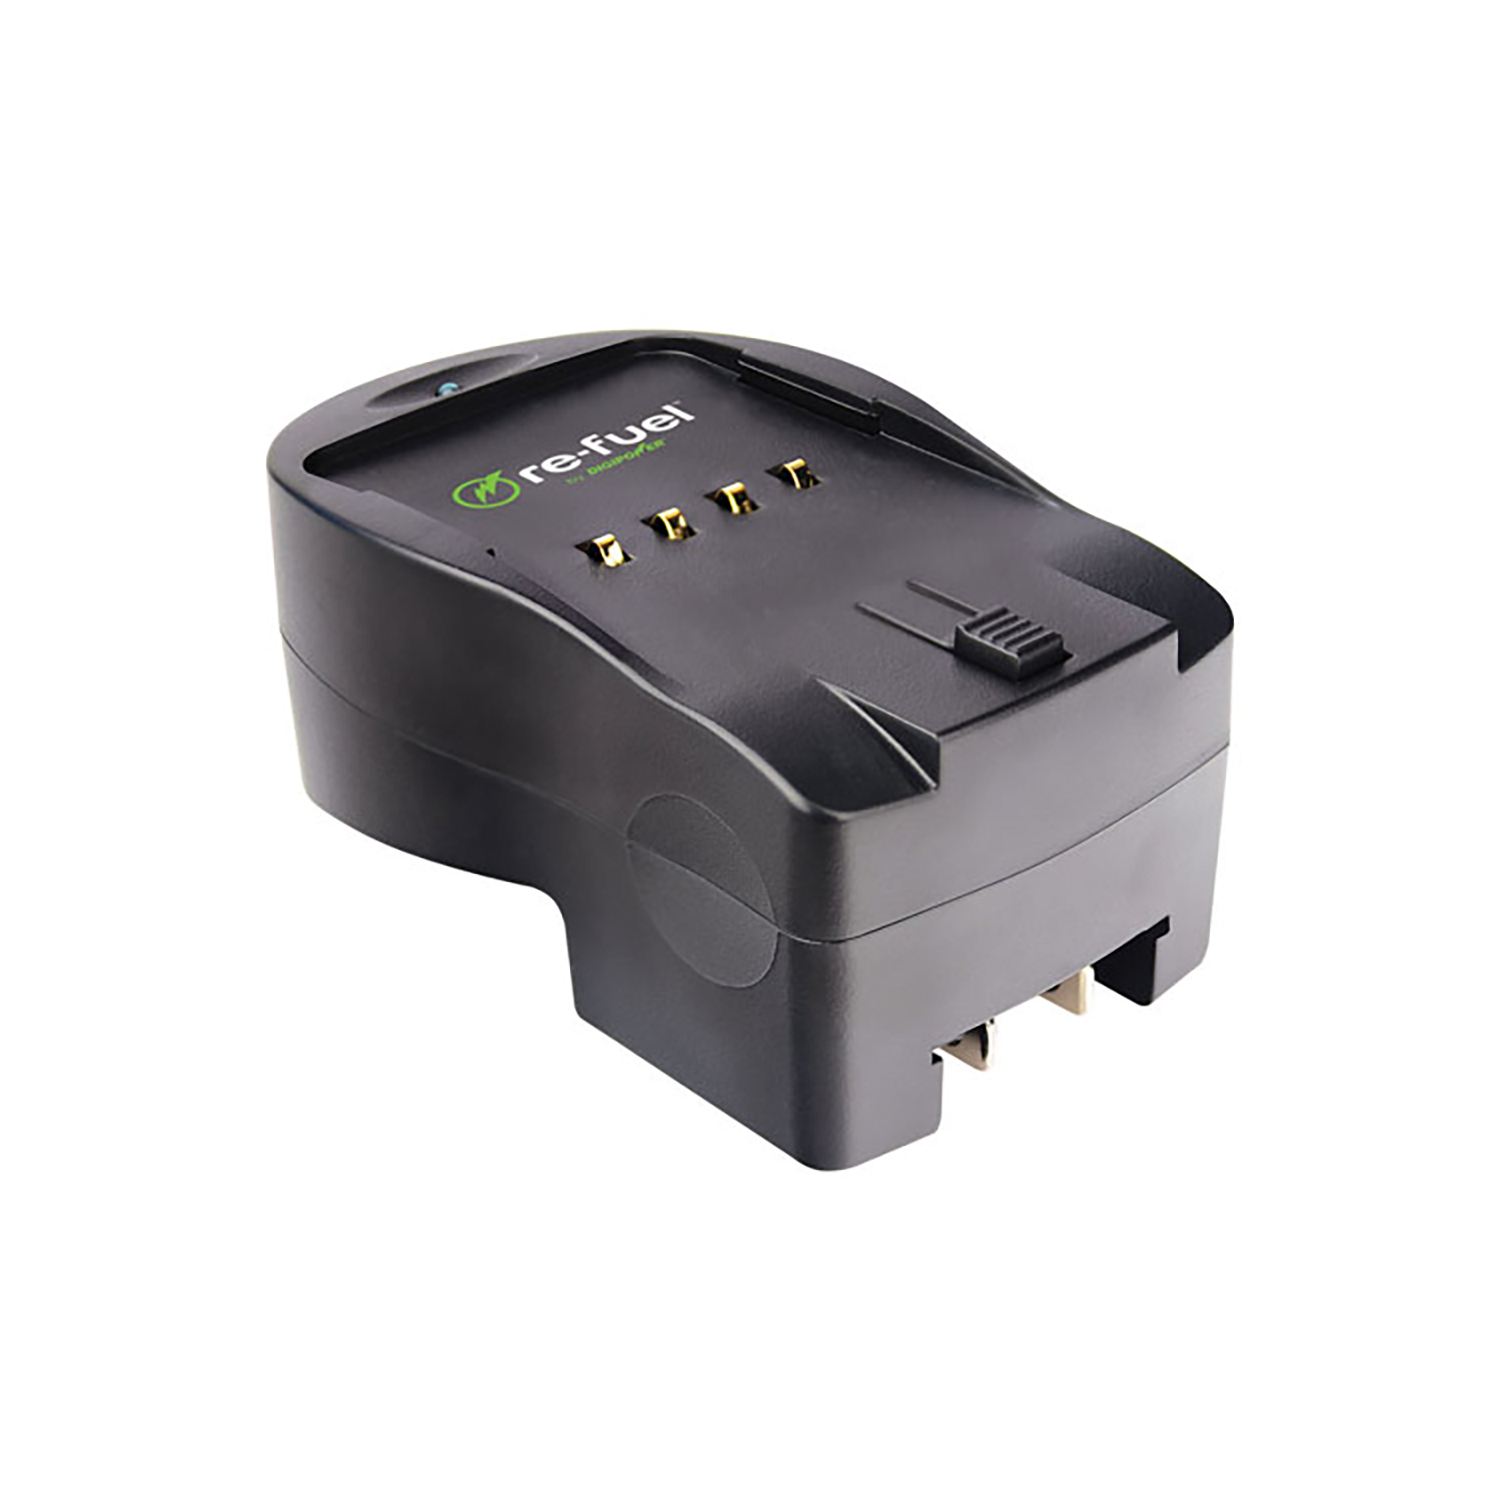 Re-Fuel Lithium-Ion Battery Charger for Canon Digital Camera Batteries